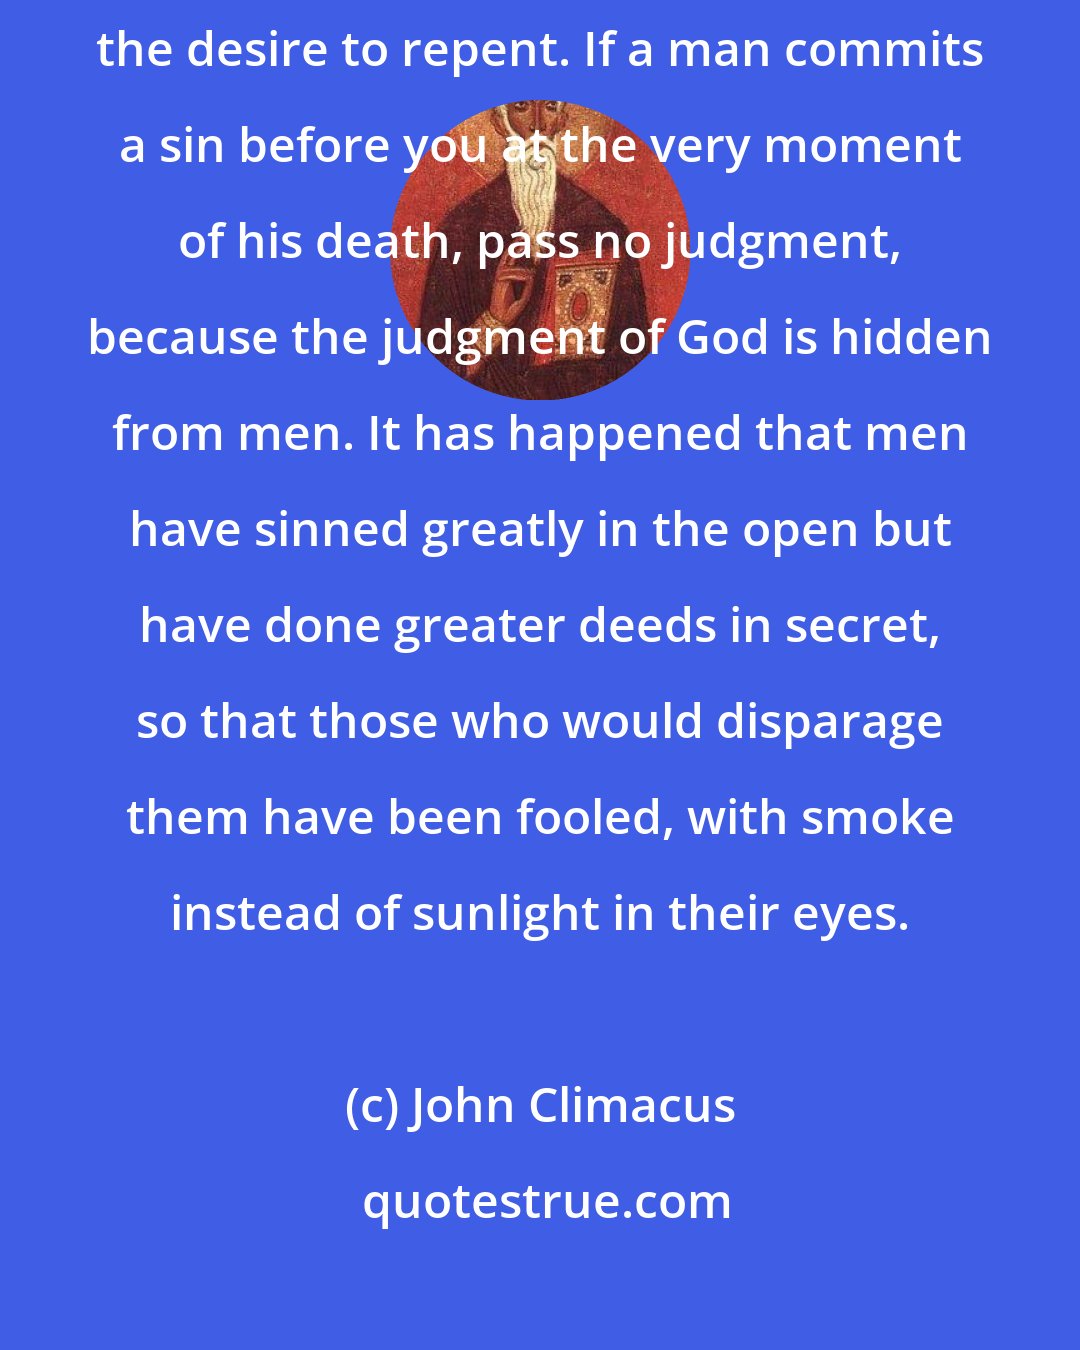 John Climacus: Fire and water do not mix, neither can you mix judgment of others with the desire to repent. If a man commits a sin before you at the very moment of his death, pass no judgment, because the judgment of God is hidden from men. It has happened that men have sinned greatly in the open but have done greater deeds in secret, so that those who would disparage them have been fooled, with smoke instead of sunlight in their eyes.